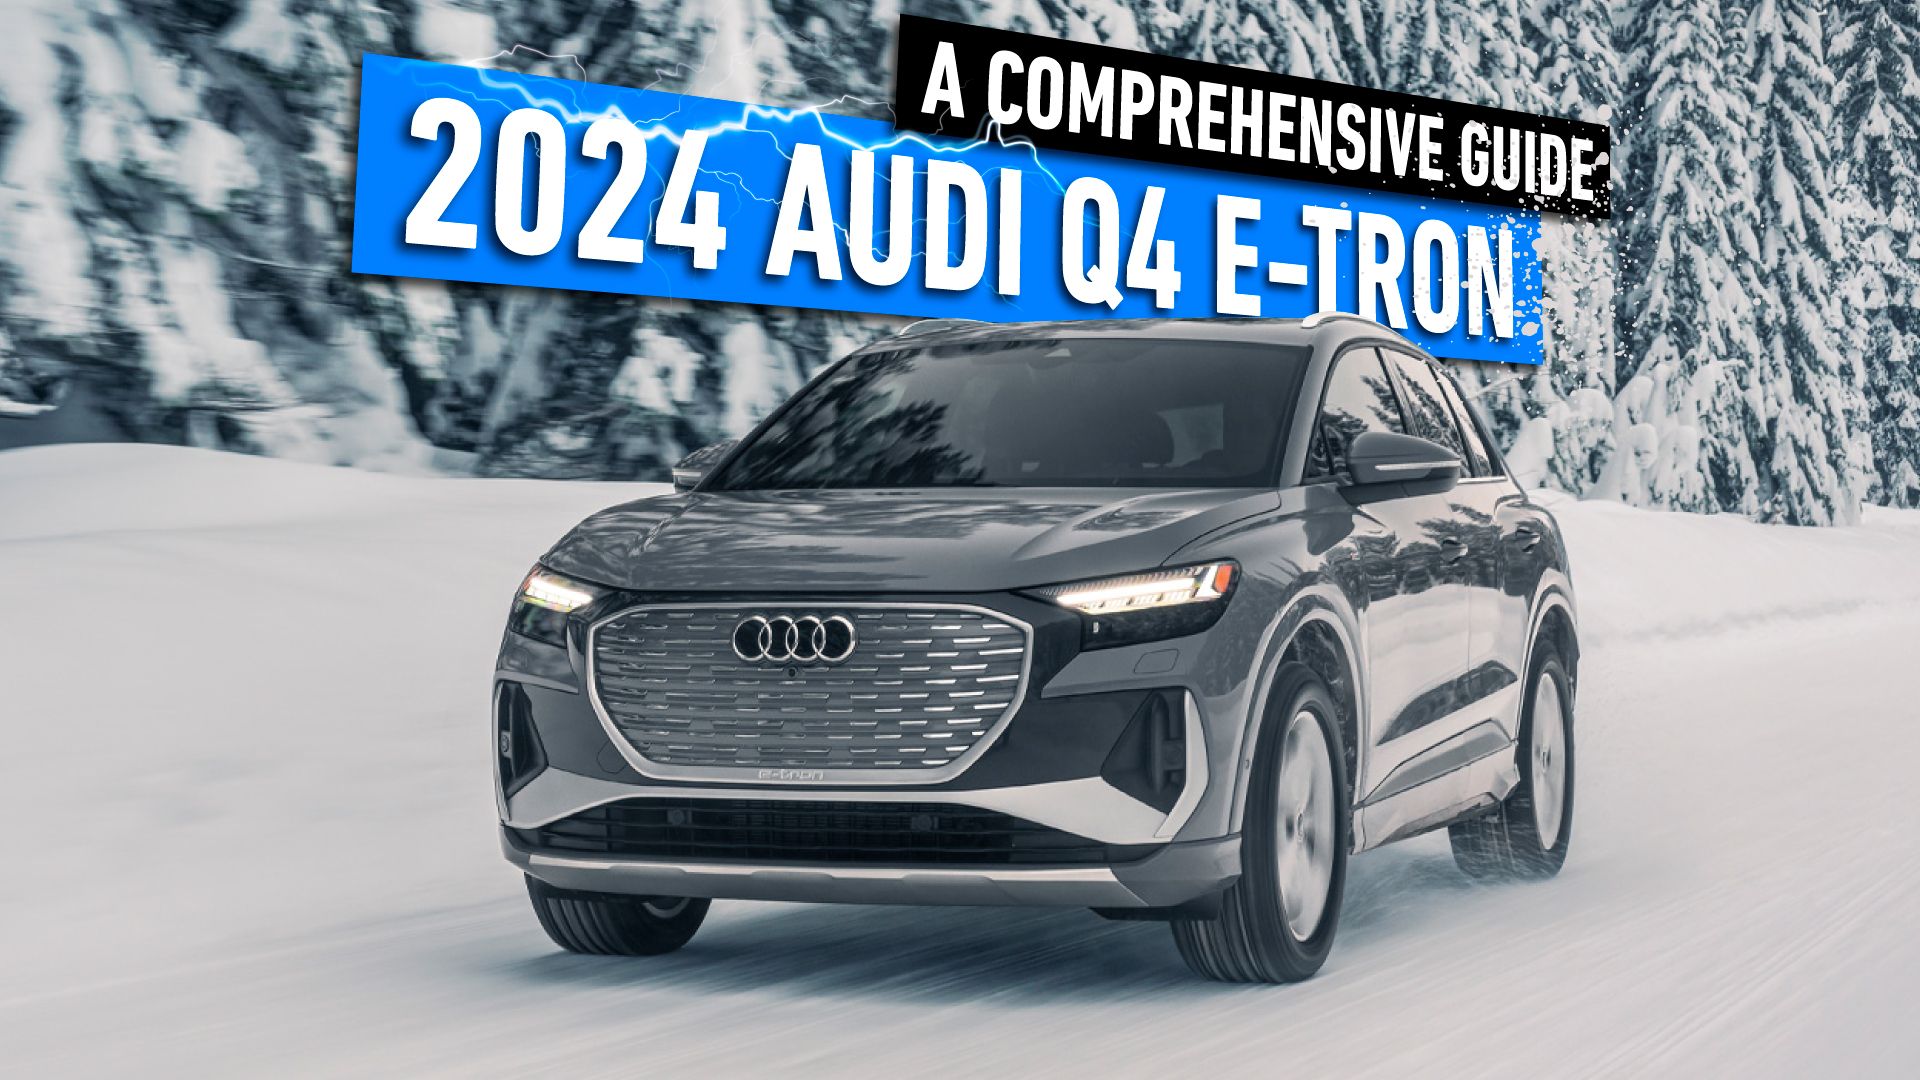 2024 Audi Q4 e-tron: A Comprehensive Guide On Features, Specs, And Pricing